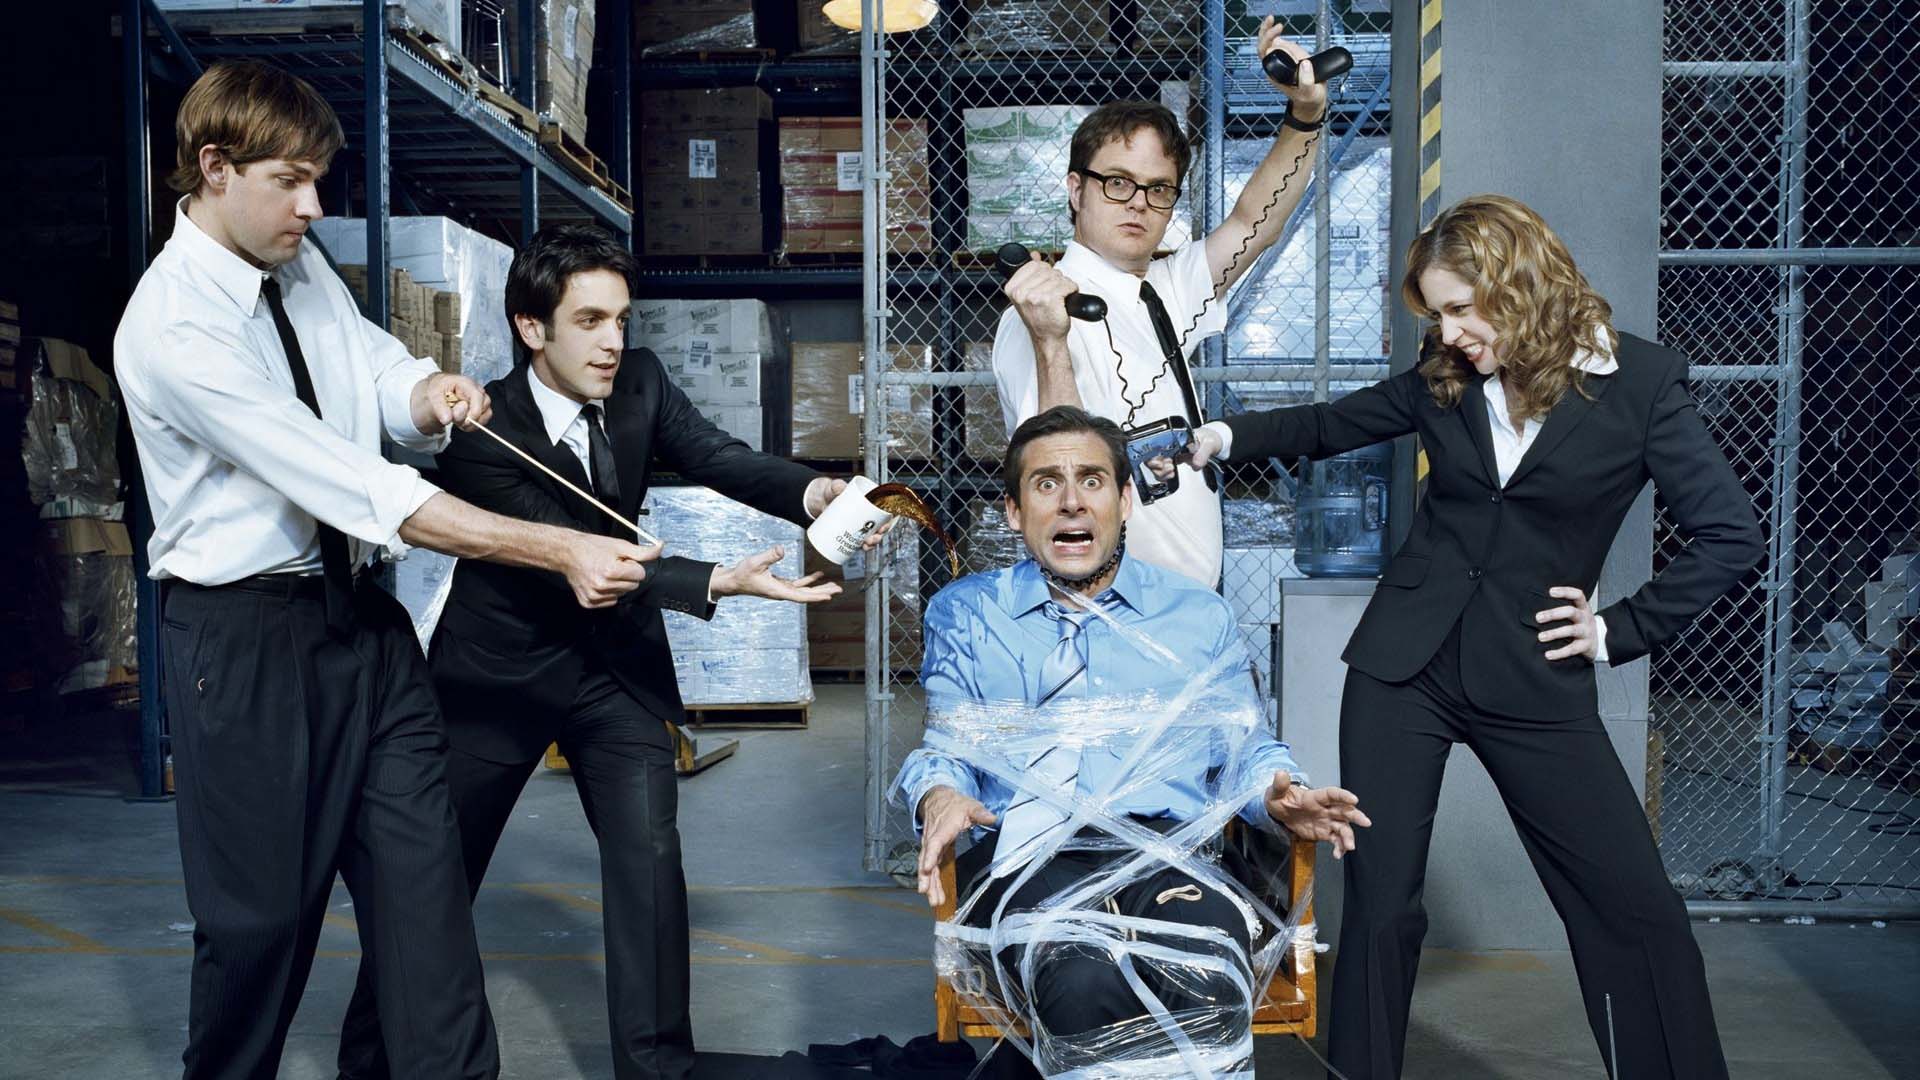 NBC is primed to revive their acclaimed mockumentary series 'The Office', based on the classic British show created by Ricky Gervais and Stephen Merchant.